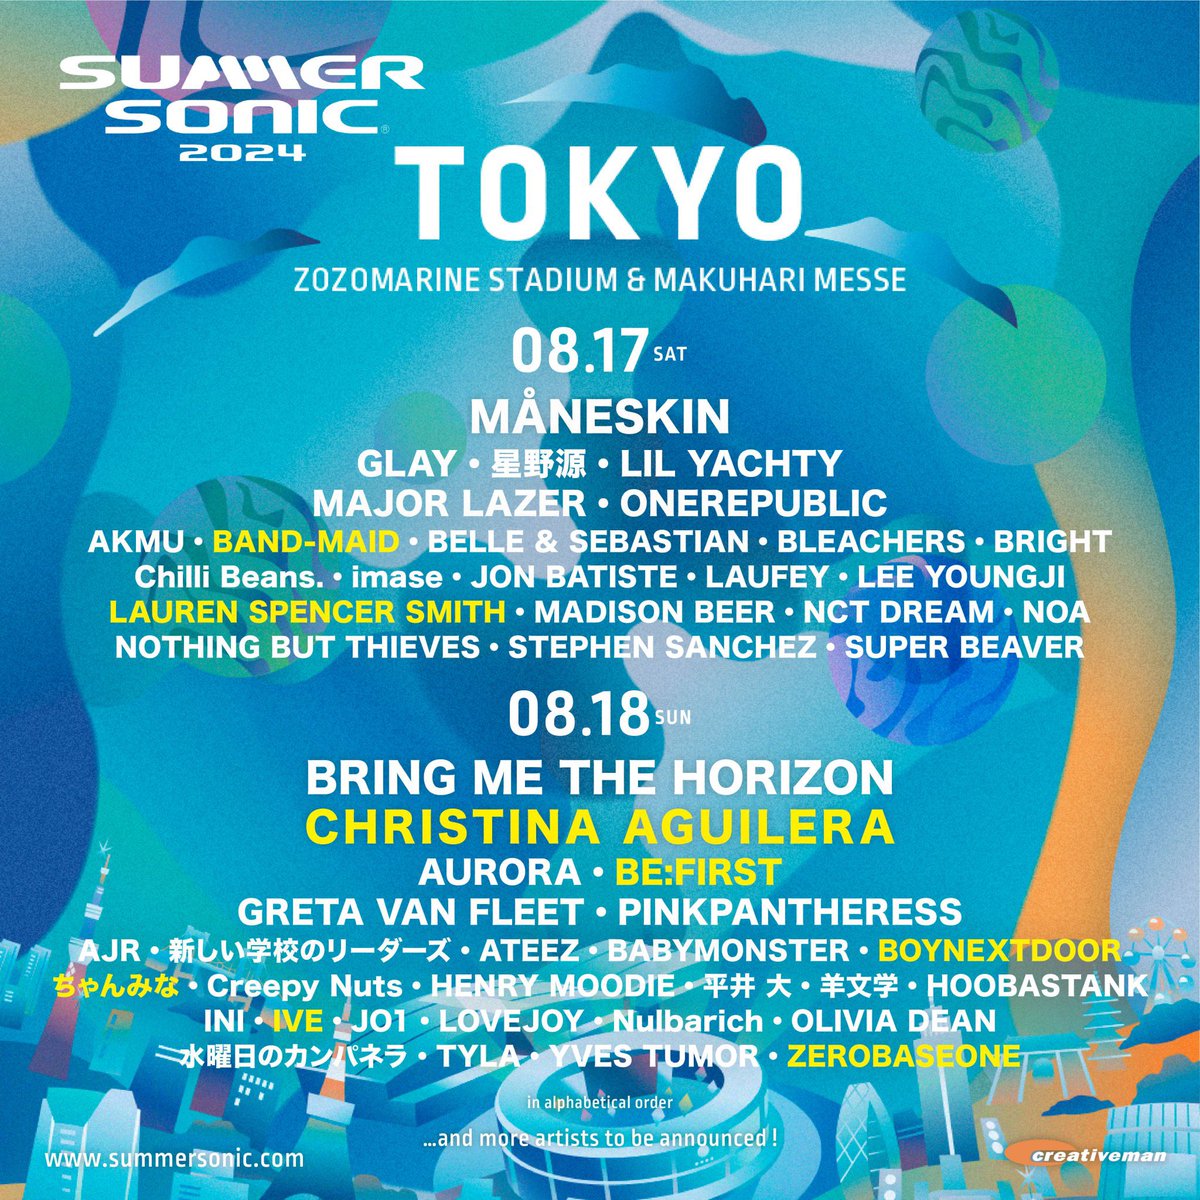 [NEWS]
BAND-MAID will perform at 'SUMMER SONIC 2024' on Saturday, August 17.

For more information, please visit
summersonic.com

2024/8/17,18開催！
「SUMMER SONIC 2024」に、BAND-MAID出演決定！
BAND-MAIDは8/17(土)に出演いたします。

詳細は下記をご覧ください。…